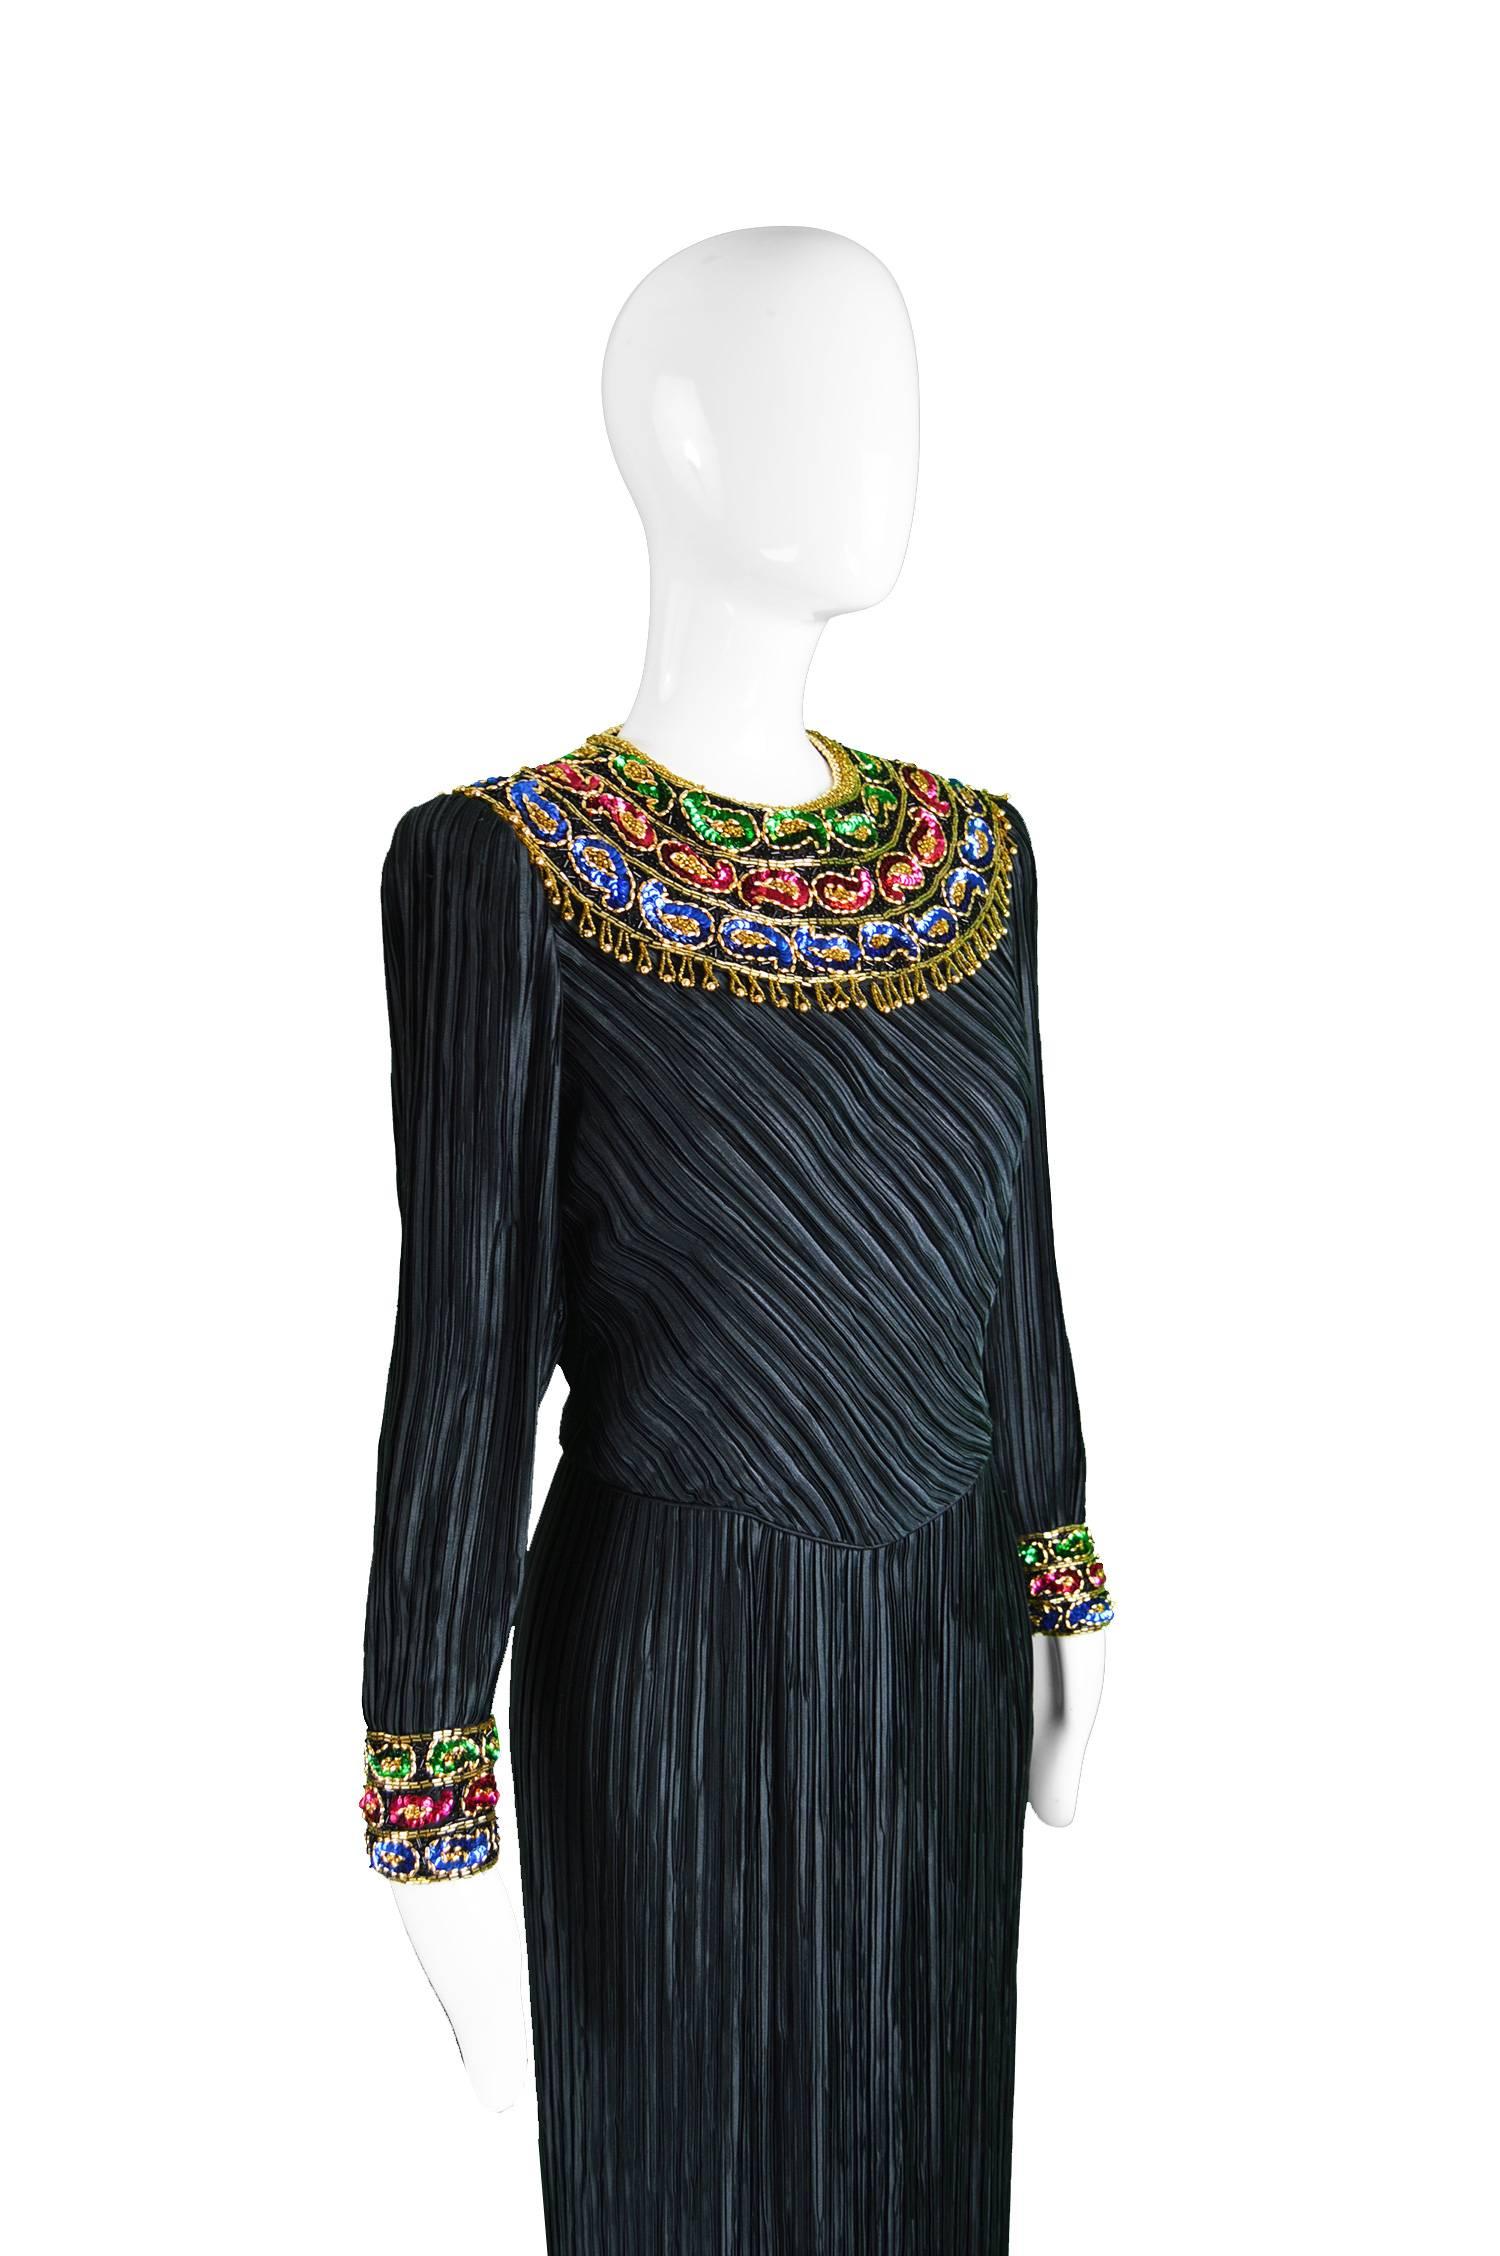 Women's George F Couture Black & Gold Fortuny Pleat Beaded Evening Gown, 1980s